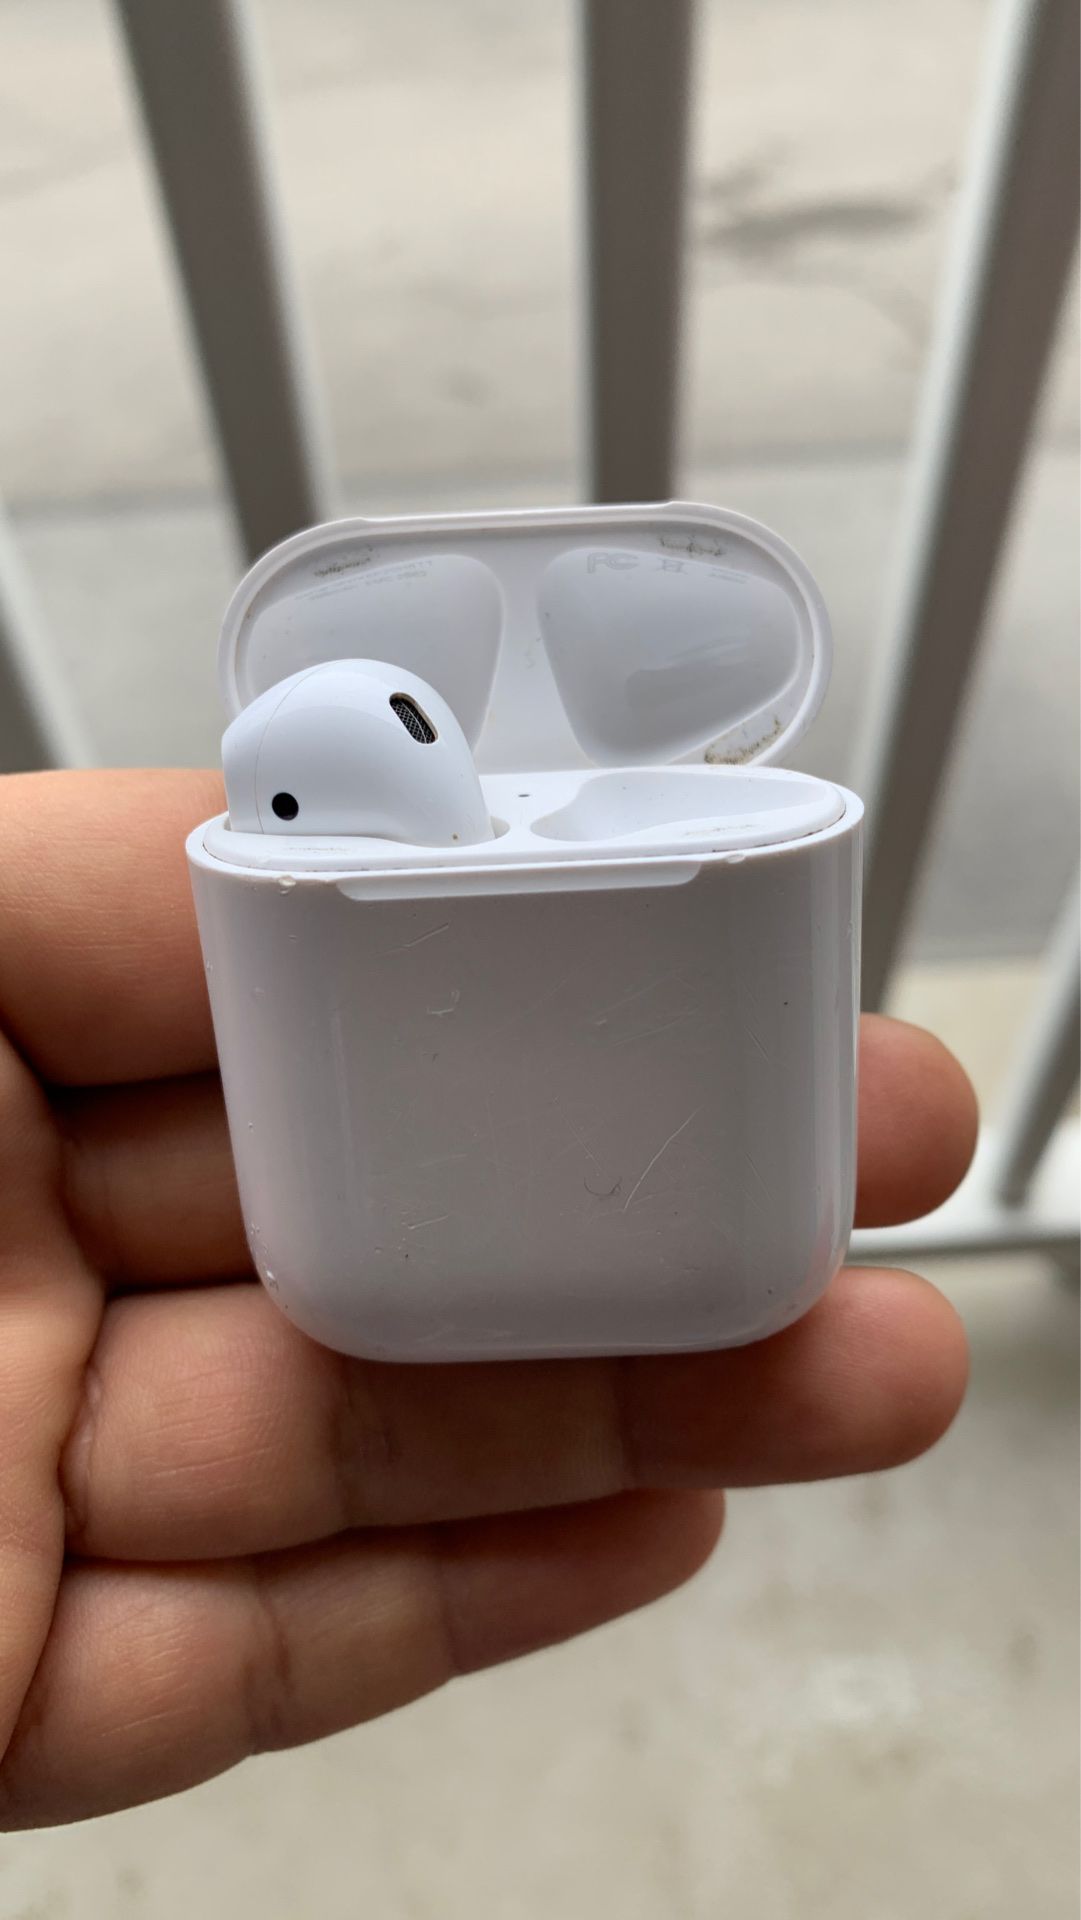 Apple airpods left only with charging case